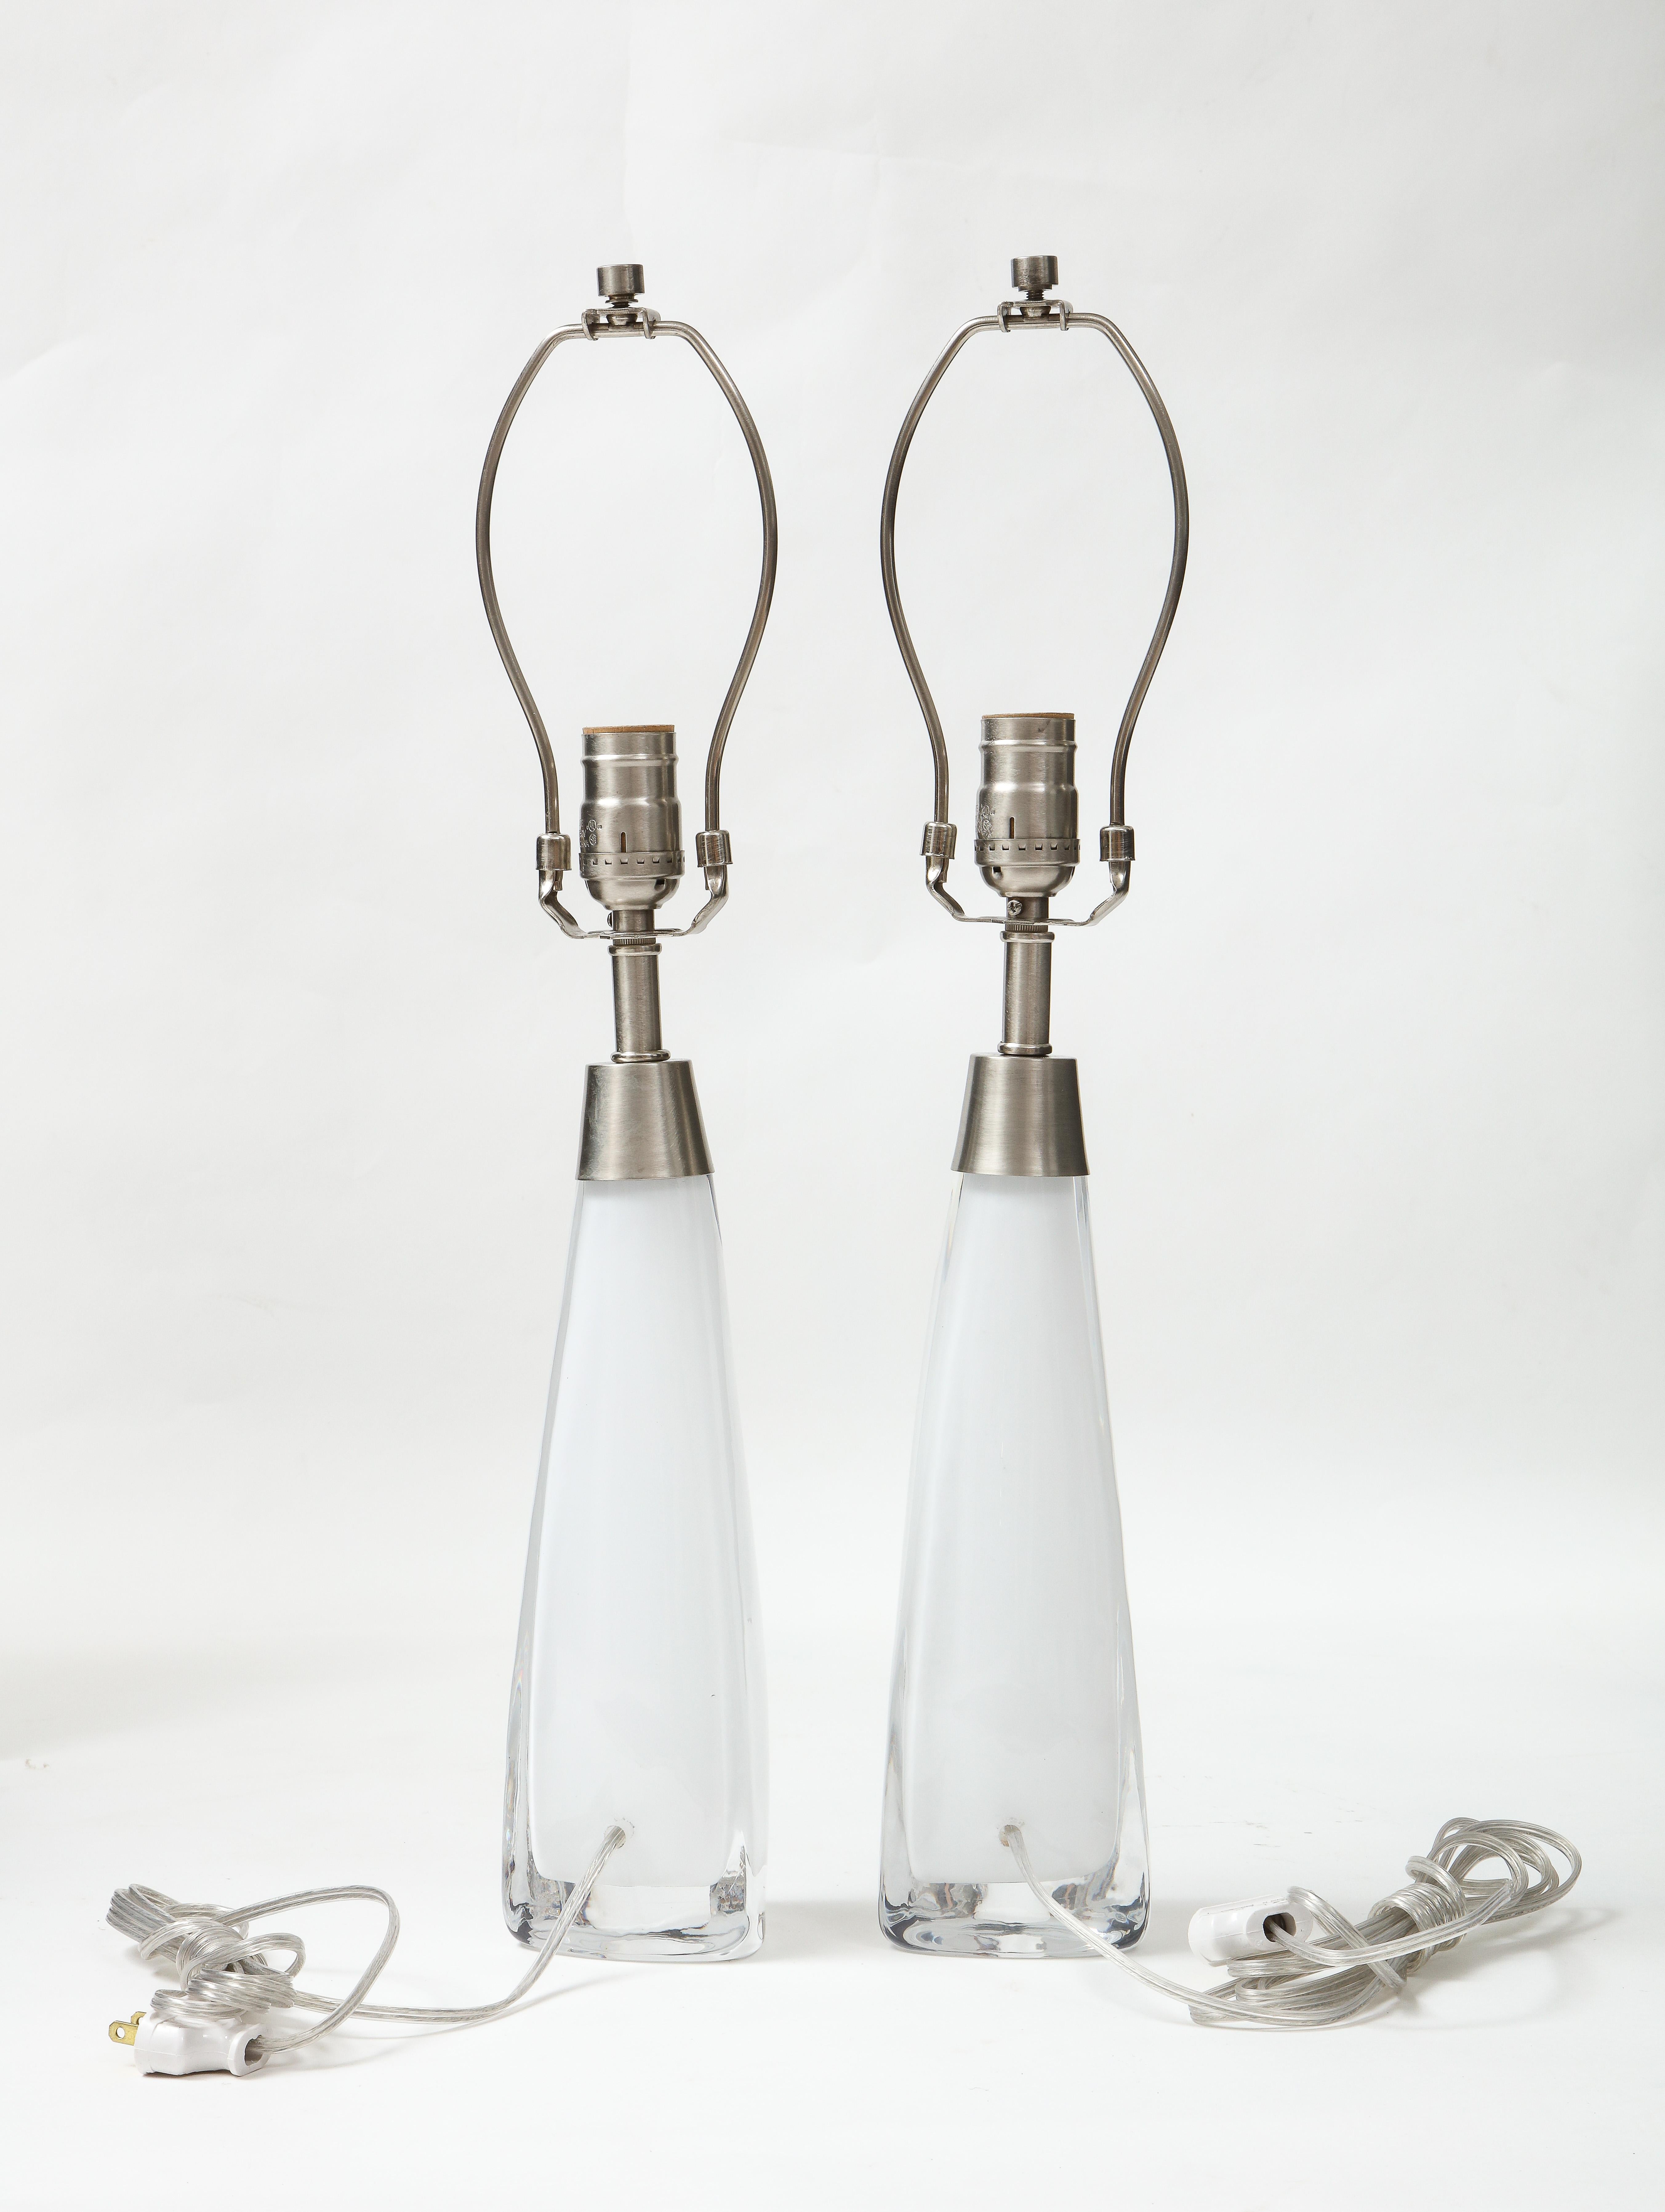 Scandinavian modern pair of white cased crystal lamps with a triangular form base and satin nickel fittings. Rewired for use in the USA, 100W bulbs max.